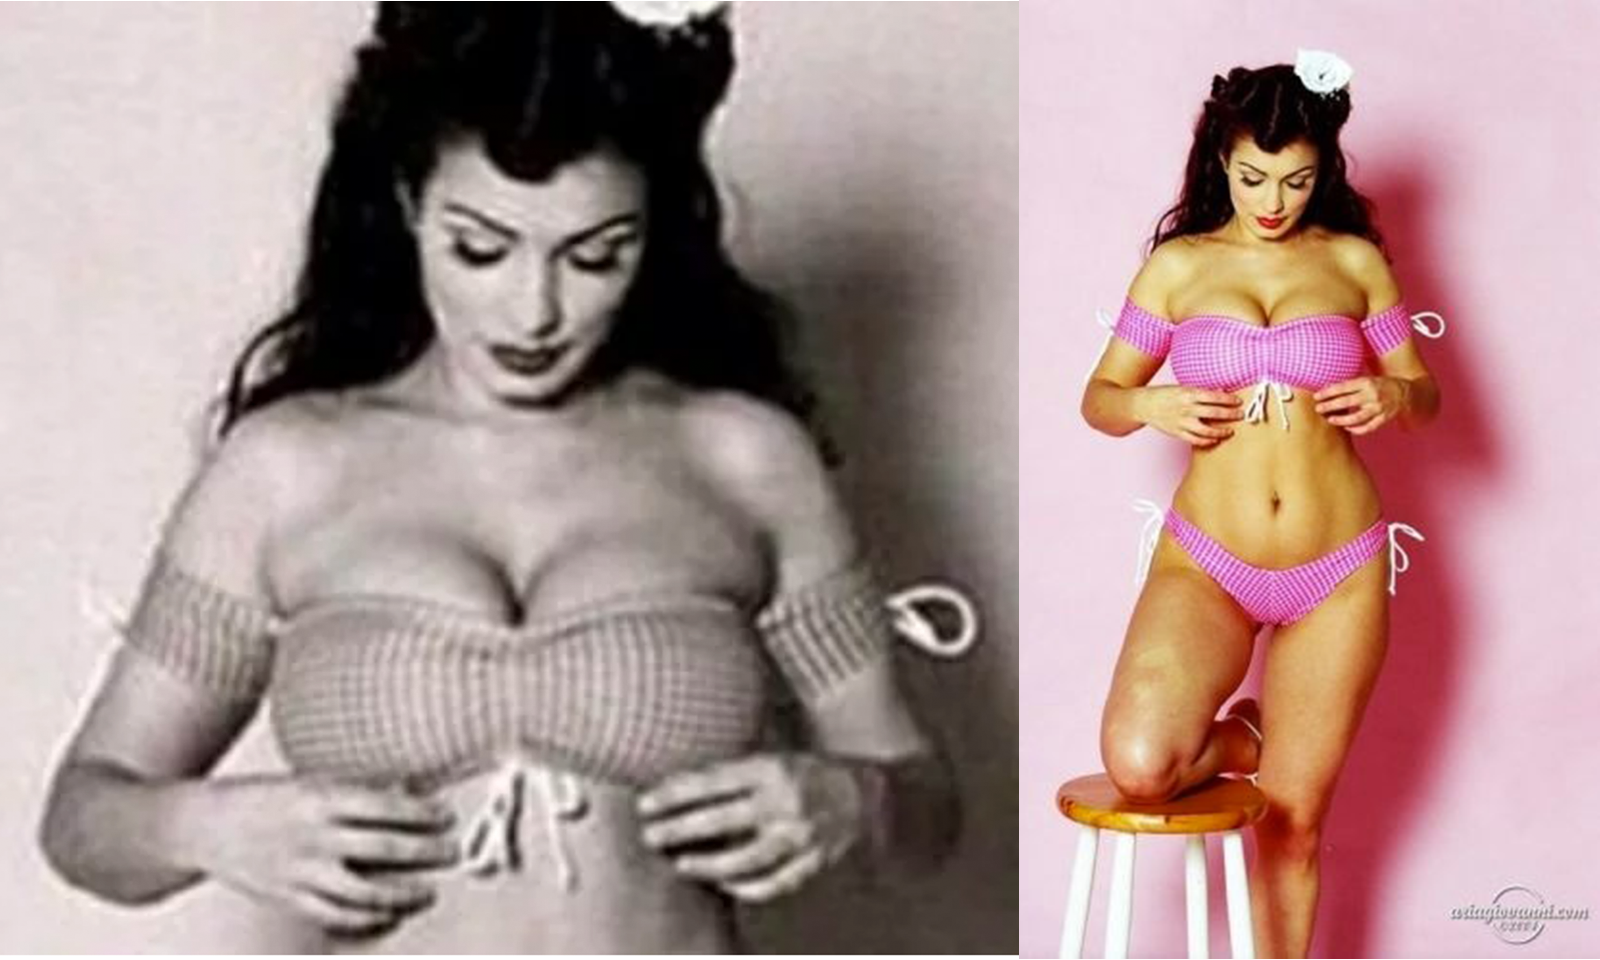 Aria Giovanni: Time's 'Perfect Body' 22 Years Before She Was Born